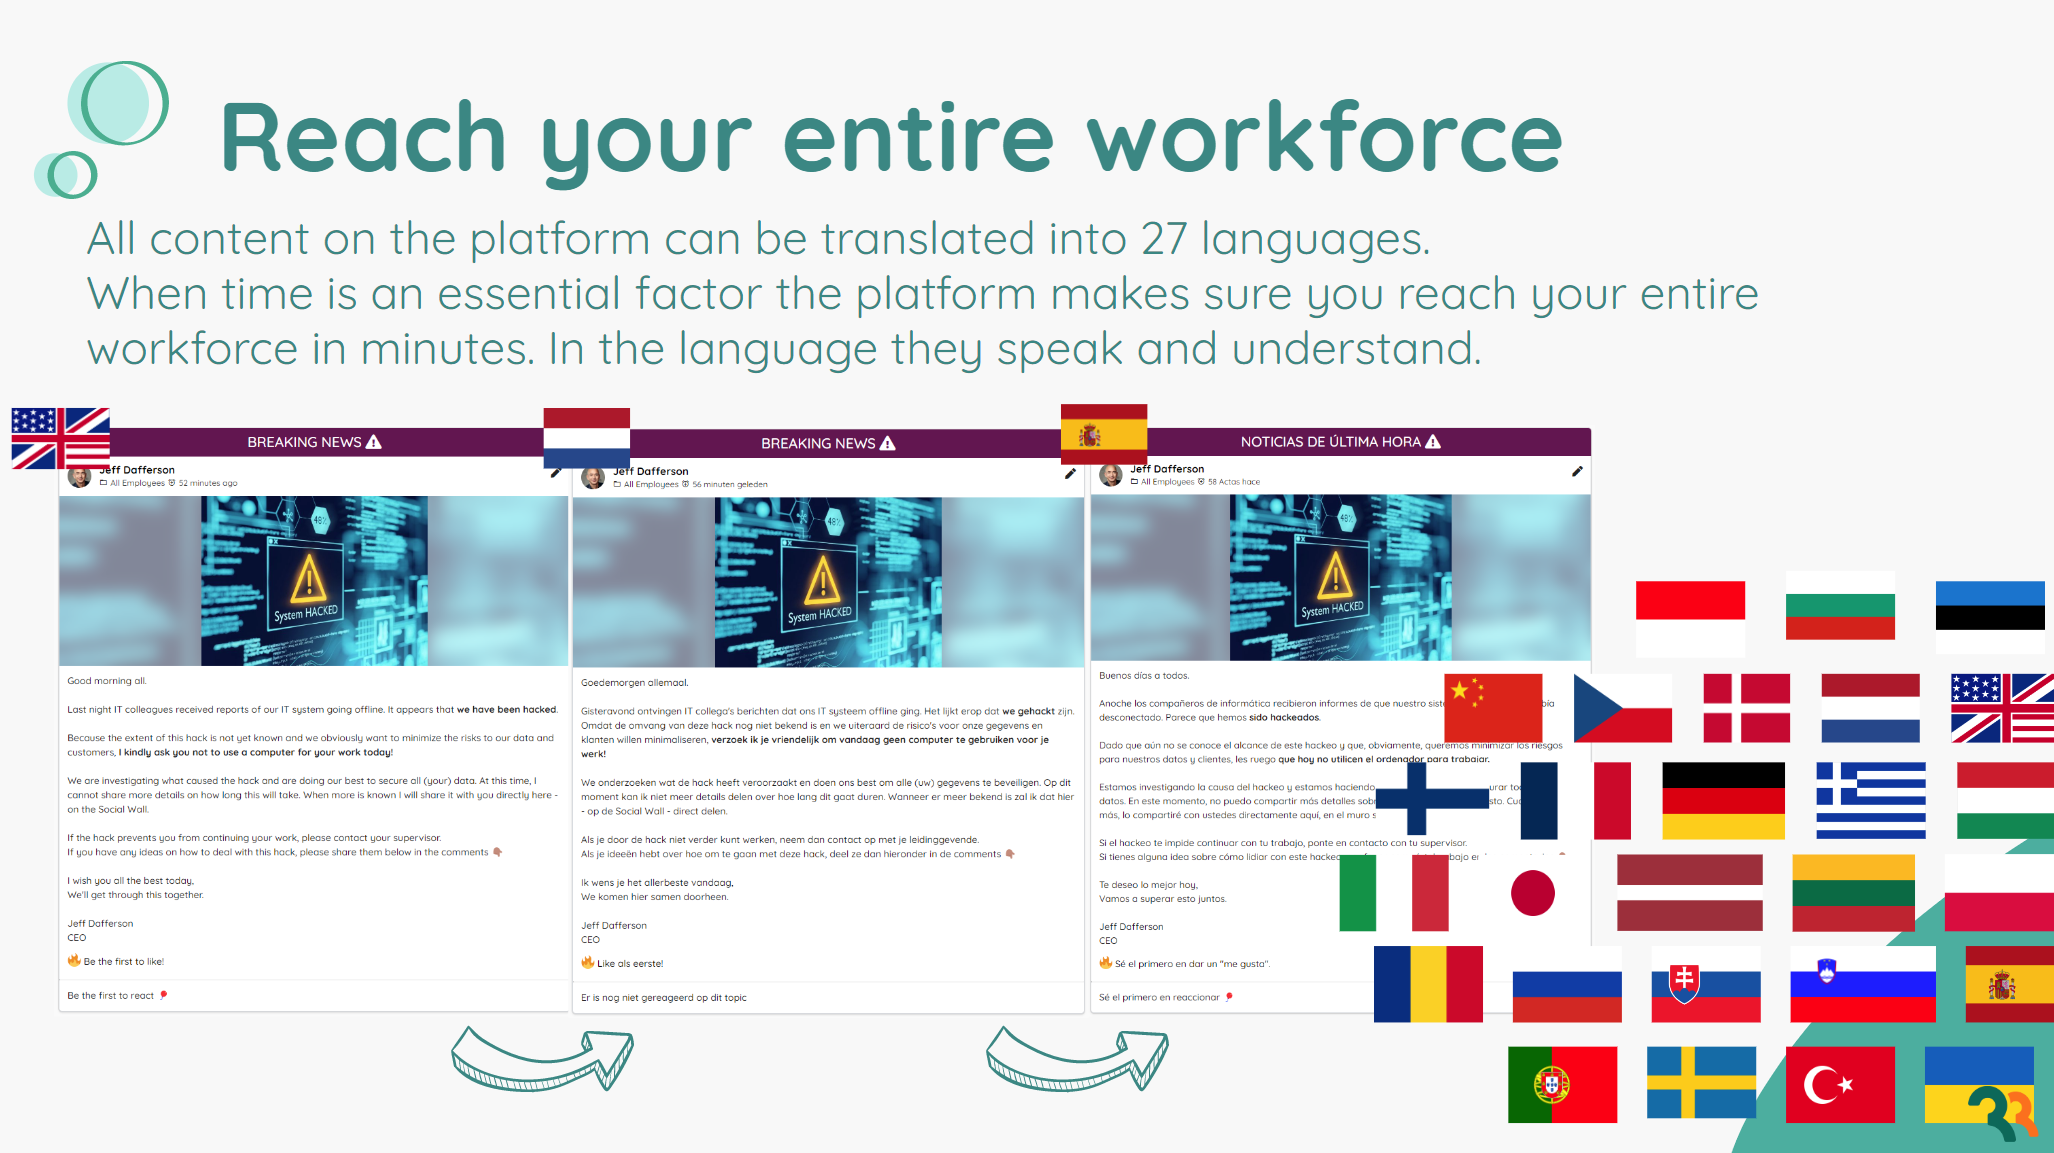 Harry HR - Connect breaks language barriers within your organization